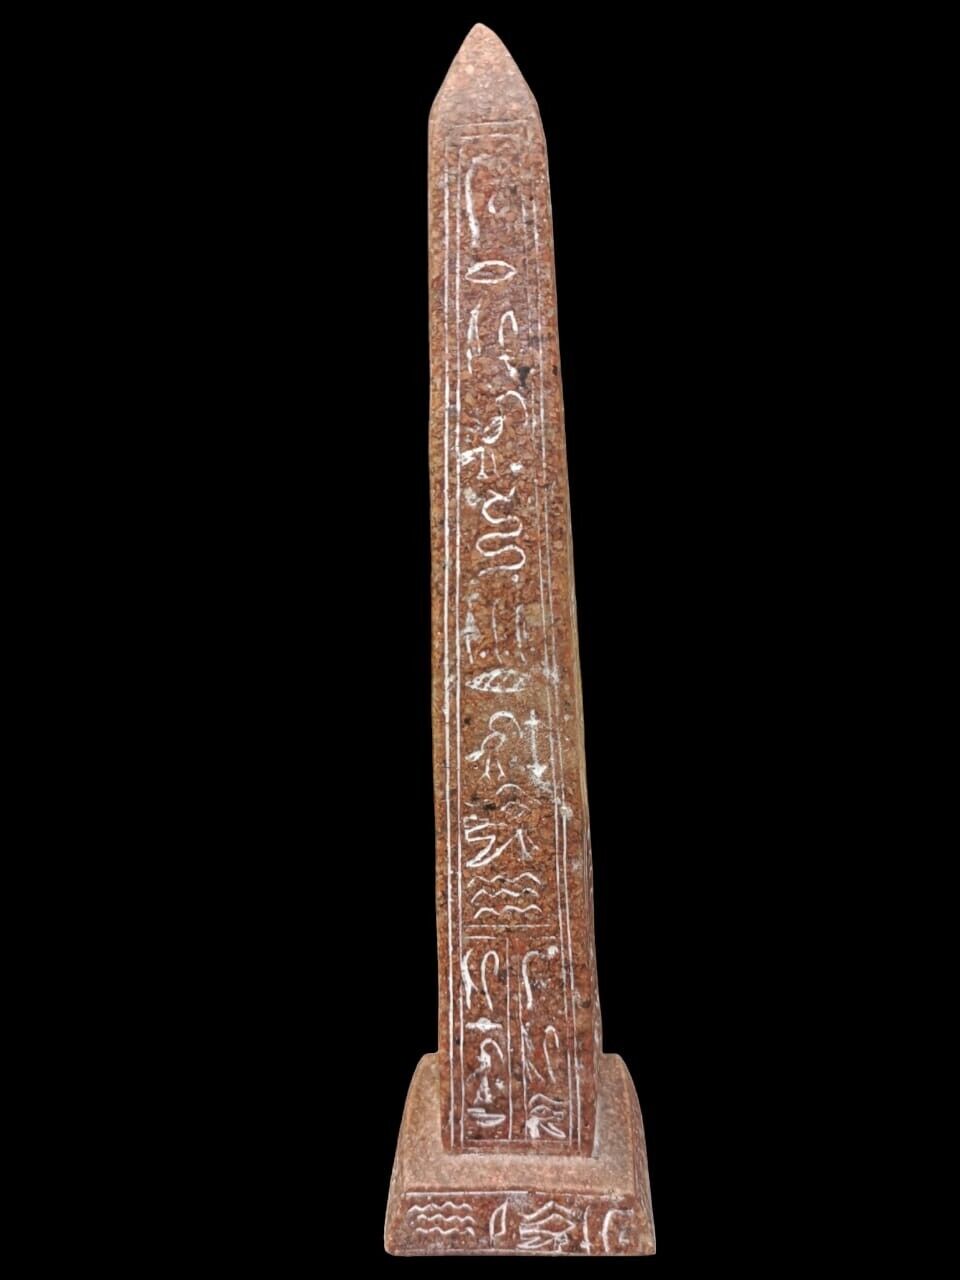 A wonderful granite Egyptian Pharaonic obelisk handcrafted from stone with Egypt